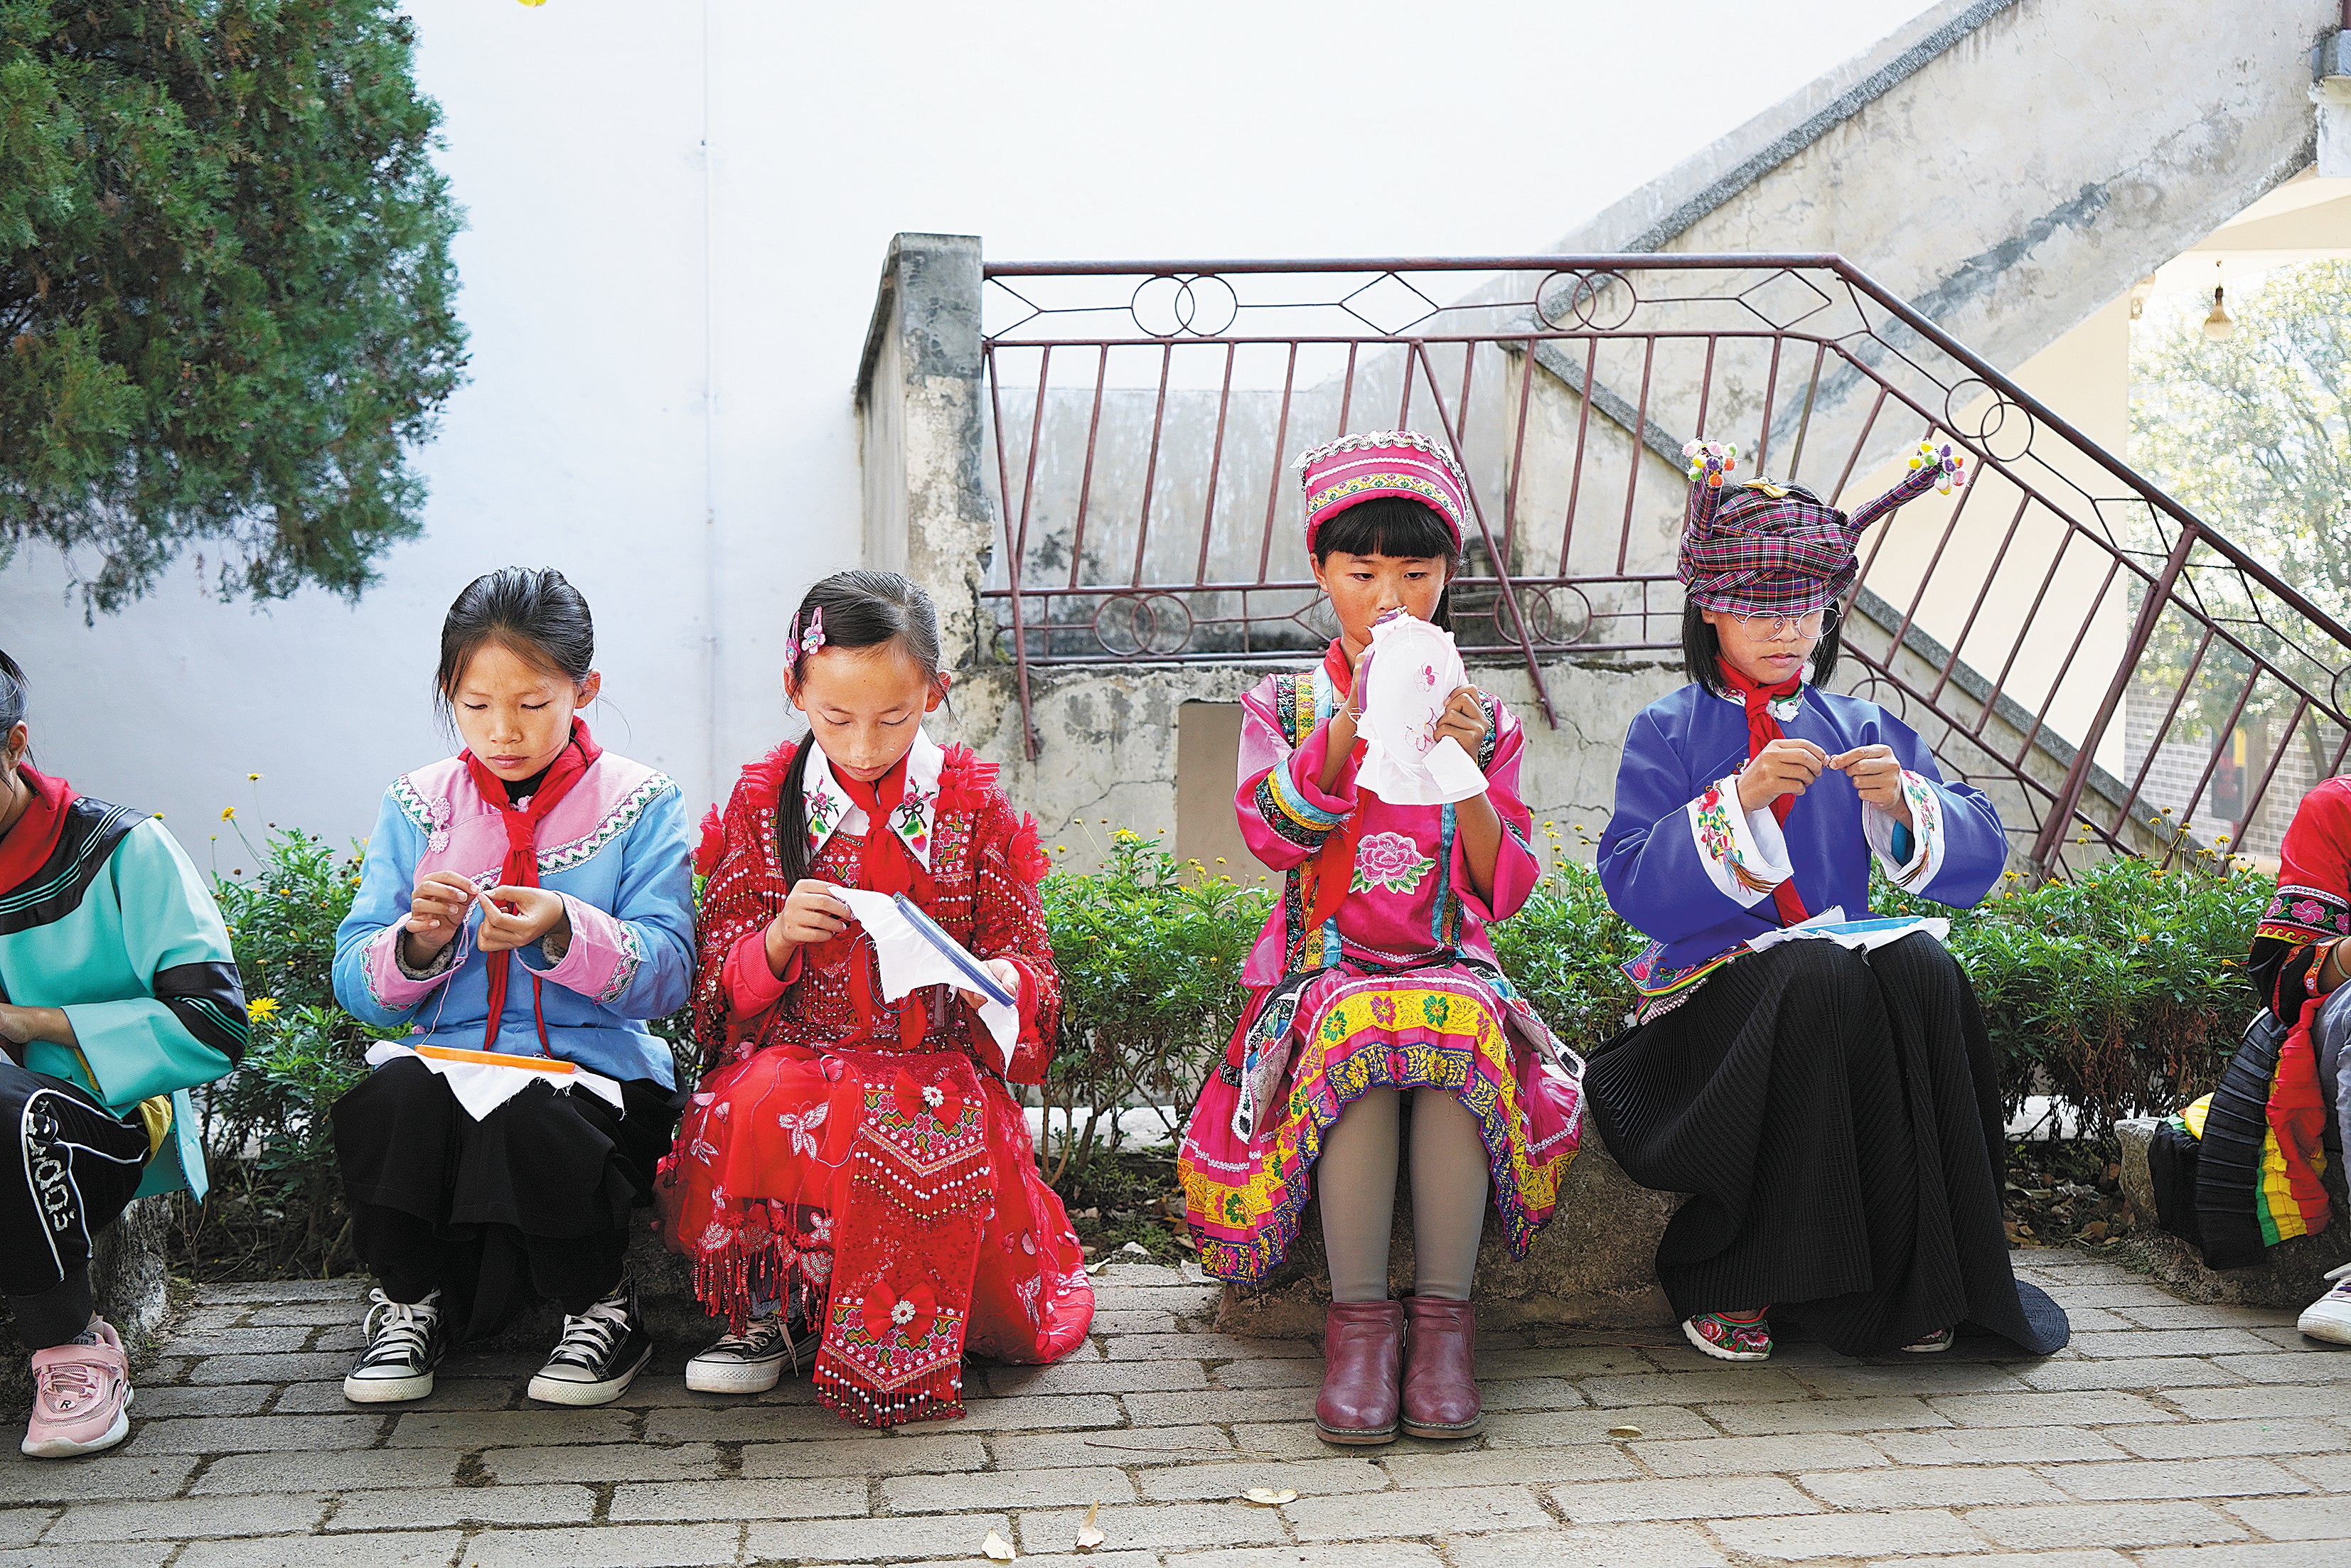 Students learn needlework at No 1 Primary School in Guangnan county, Yunnan province